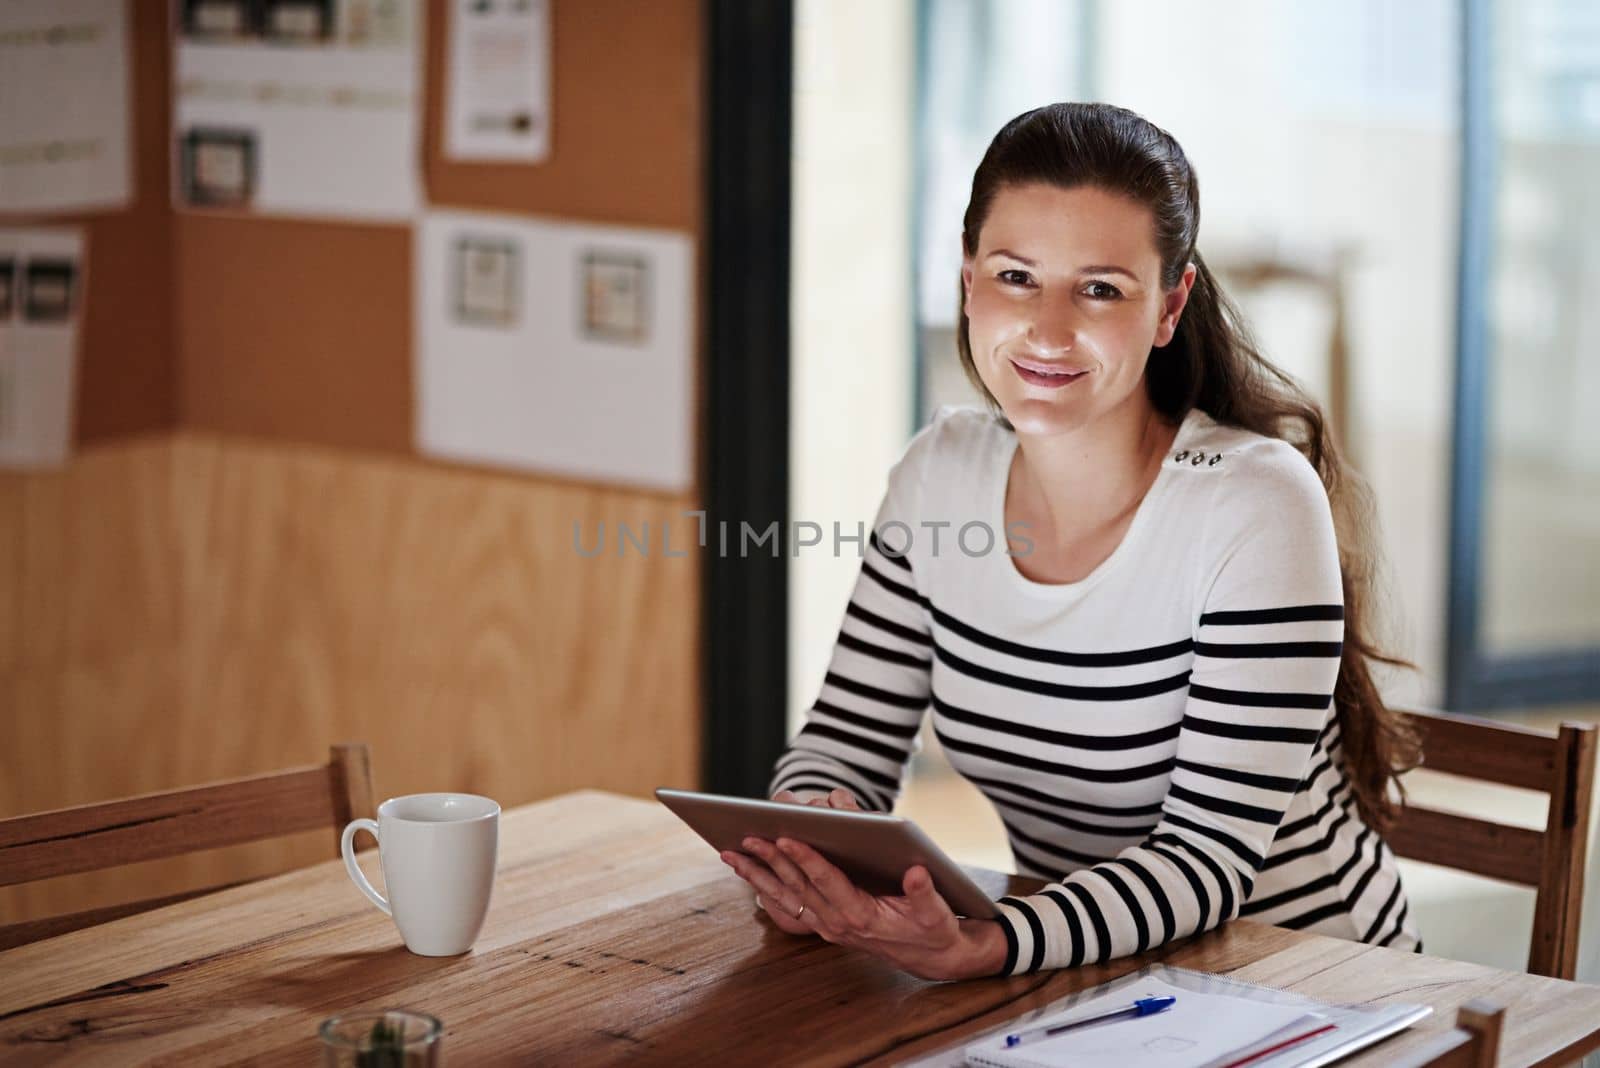 Staying connected in todays business world. Portrait of a young businesswoman using a digital tablet in an office. by YuriArcurs